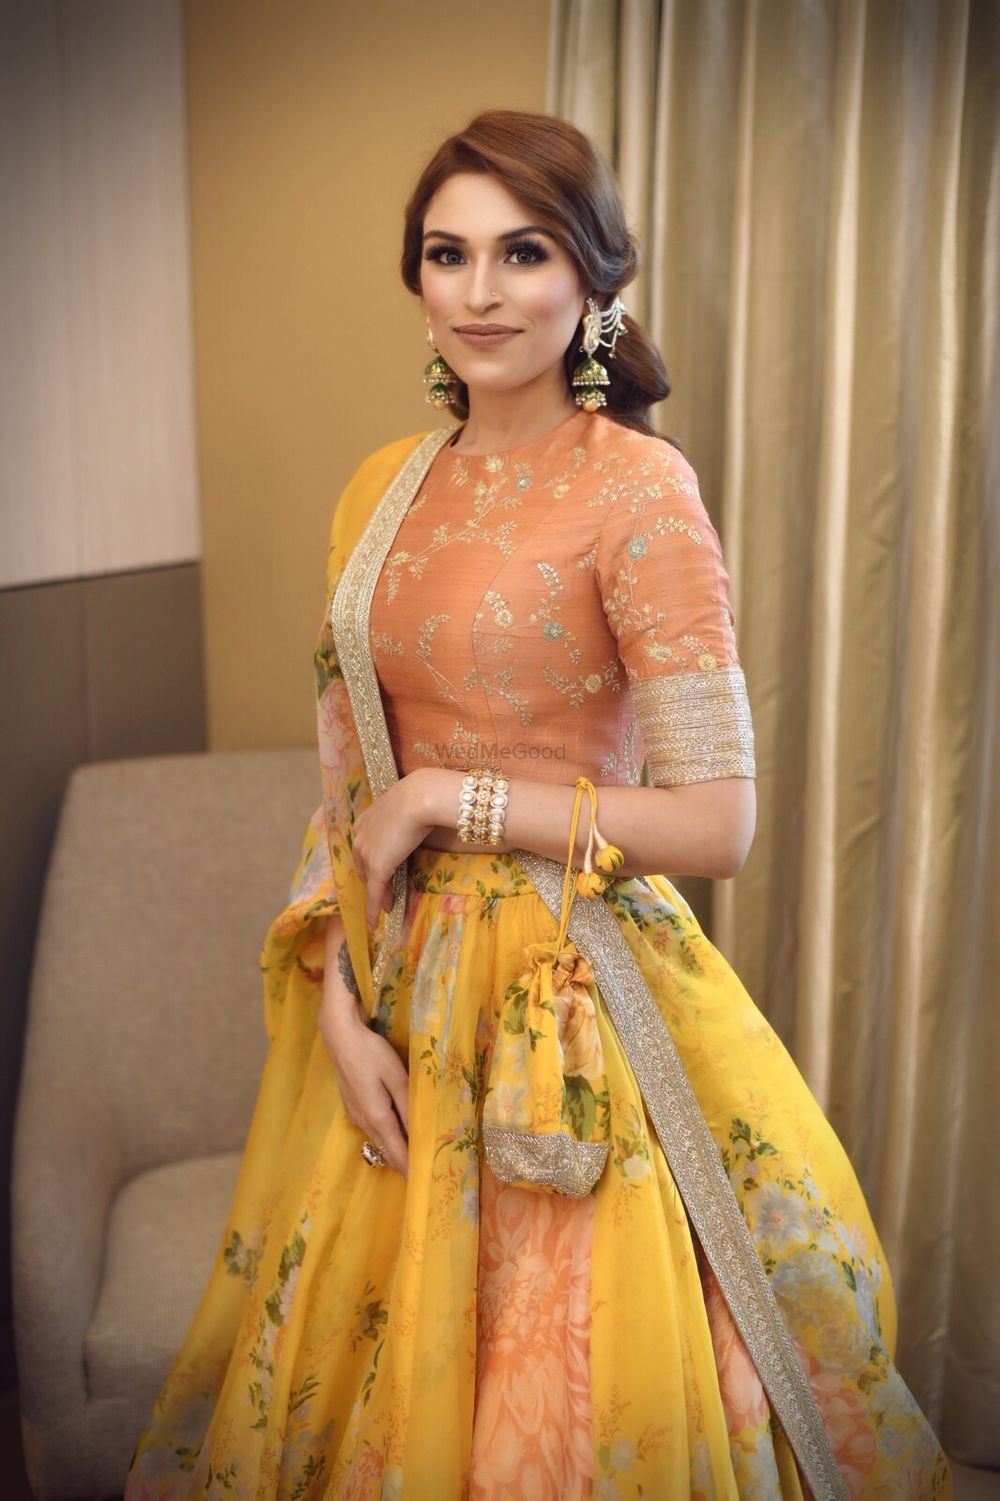 Photo of A bride poses in a coral and yellow light lehenga